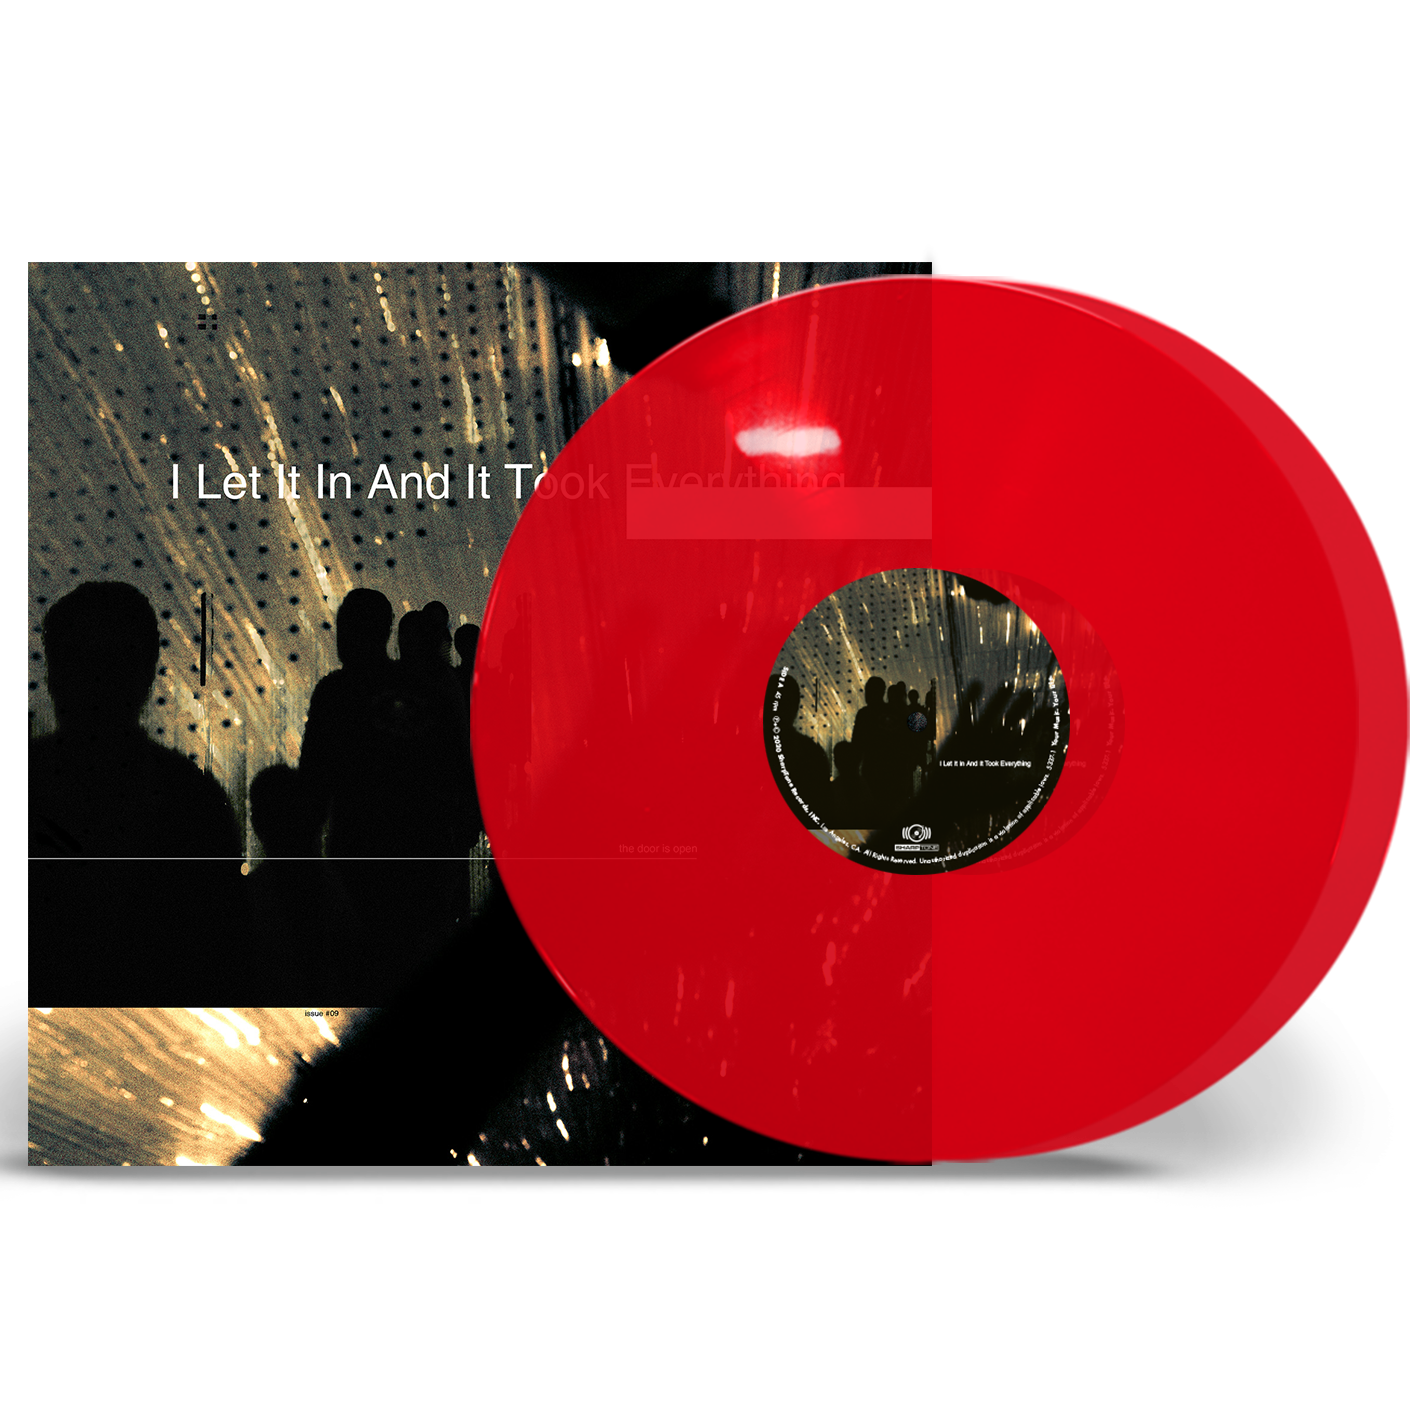 I Let It In And It Took Everything: Limited Edition Transparent Red Vinyl 2LP